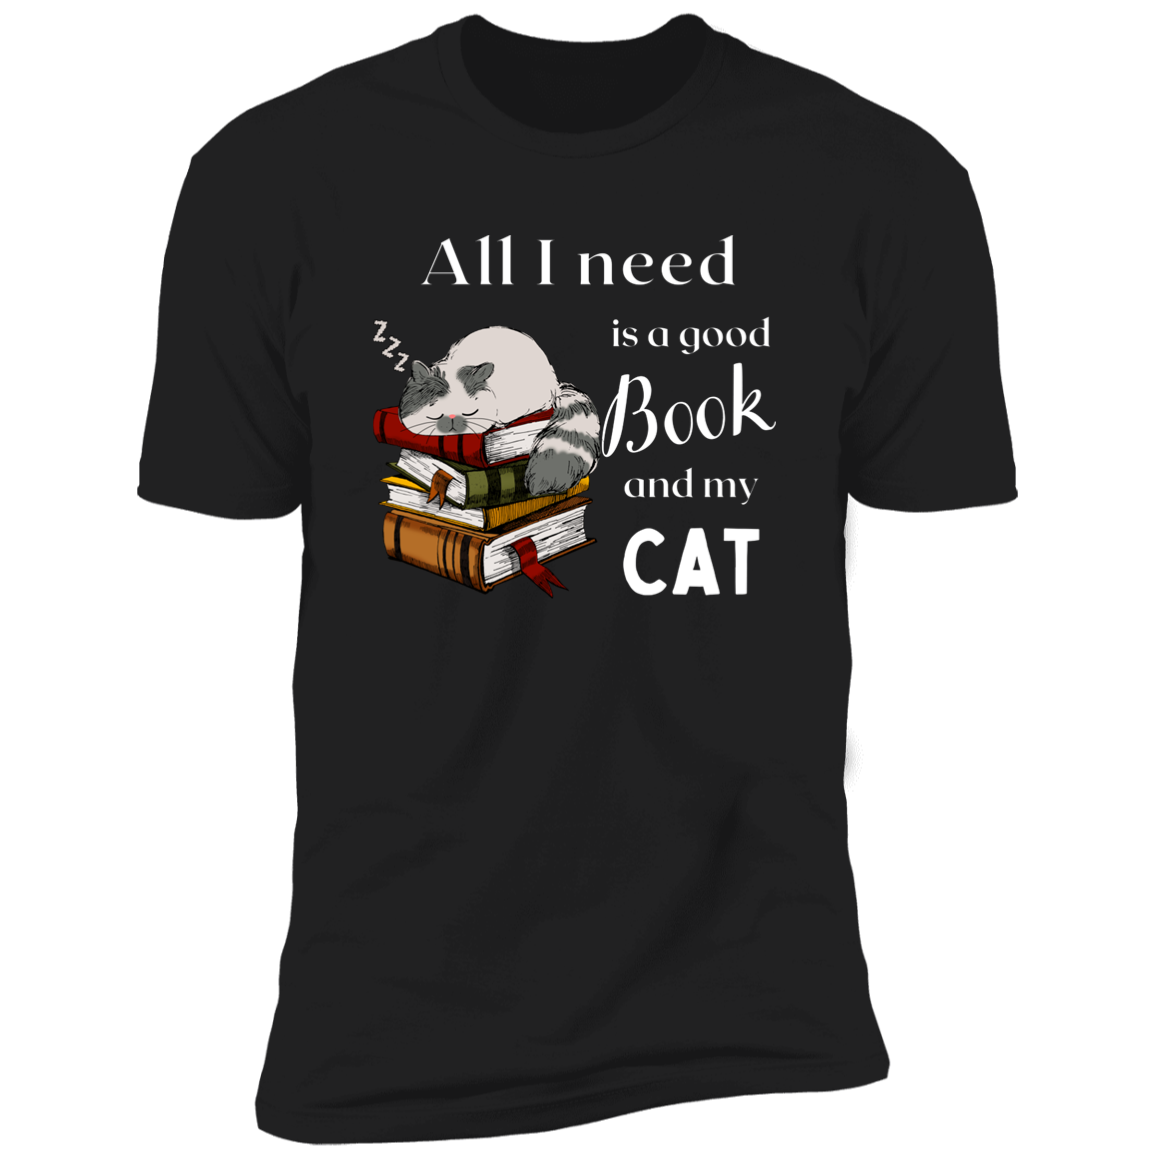 All I Need is a Good Book and My Cat t-shirt for humans, in navy blue